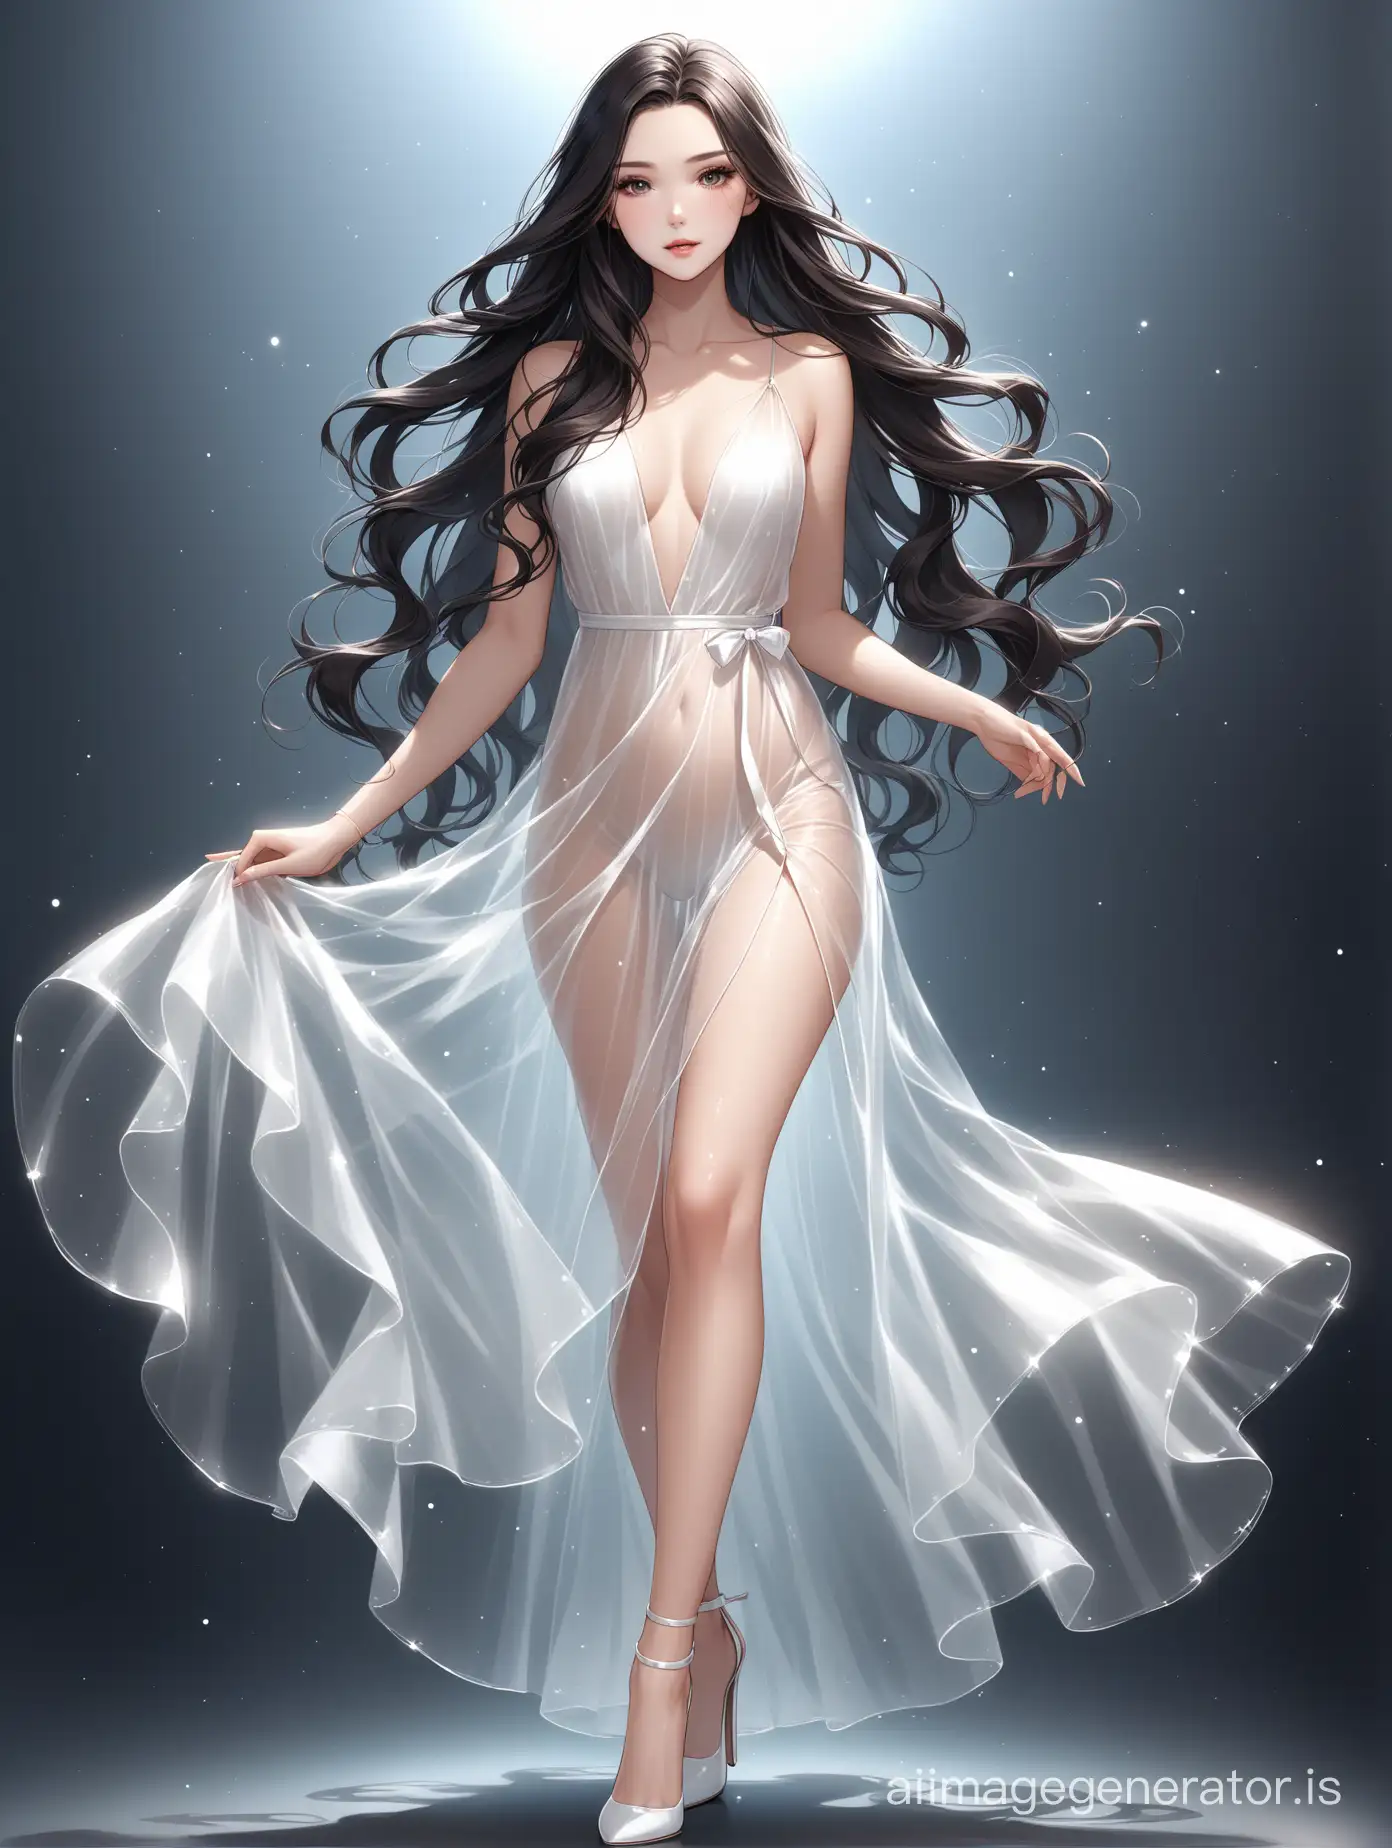 beautiful woman, dark long wavy and loose hair, wearing a transparent white dress, in high-heeled shoes